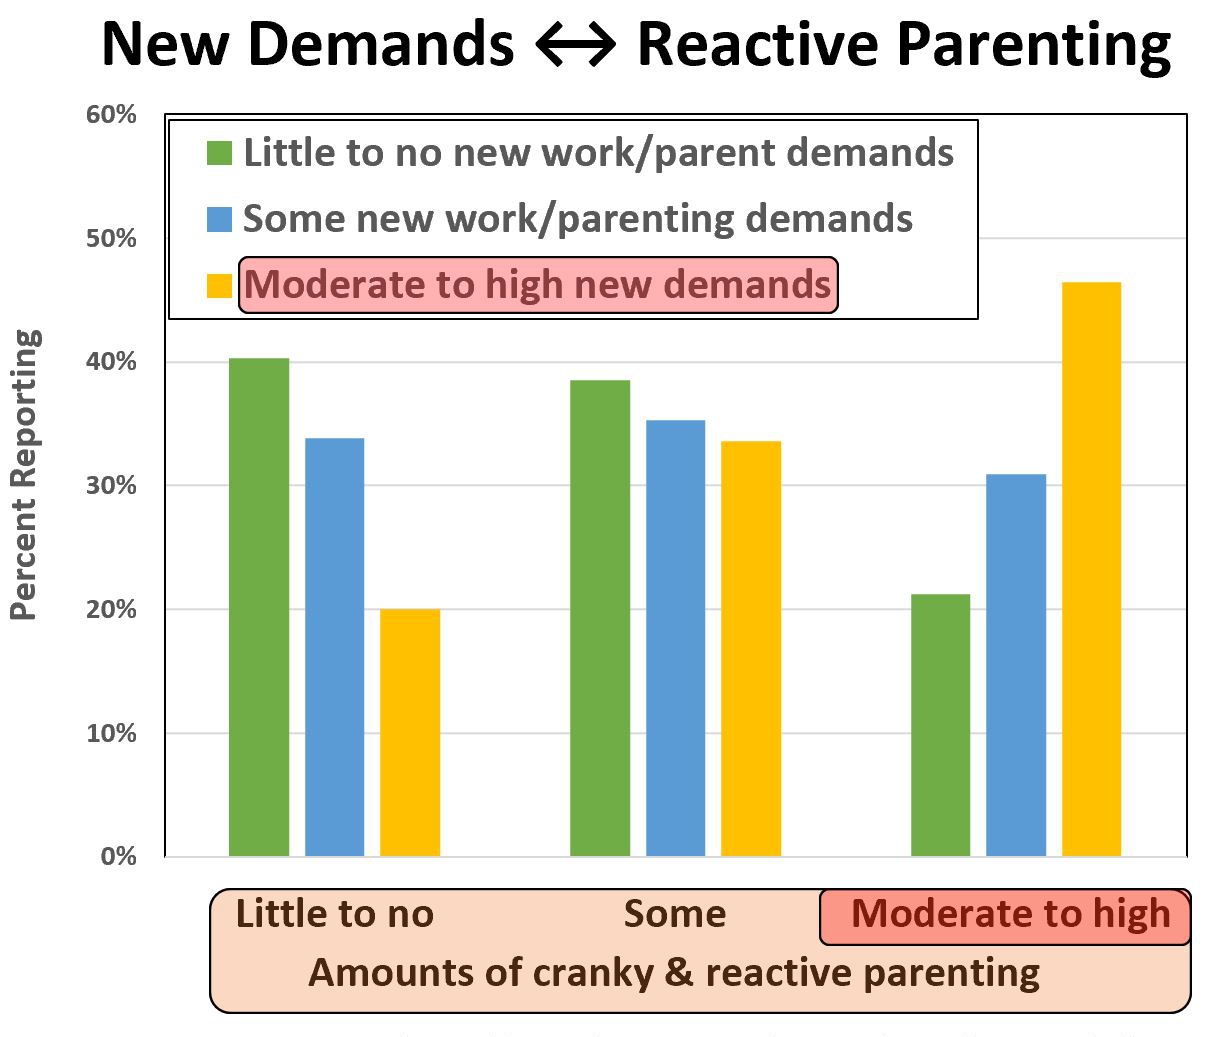 907 newdemand stress by reactive parenting nolink